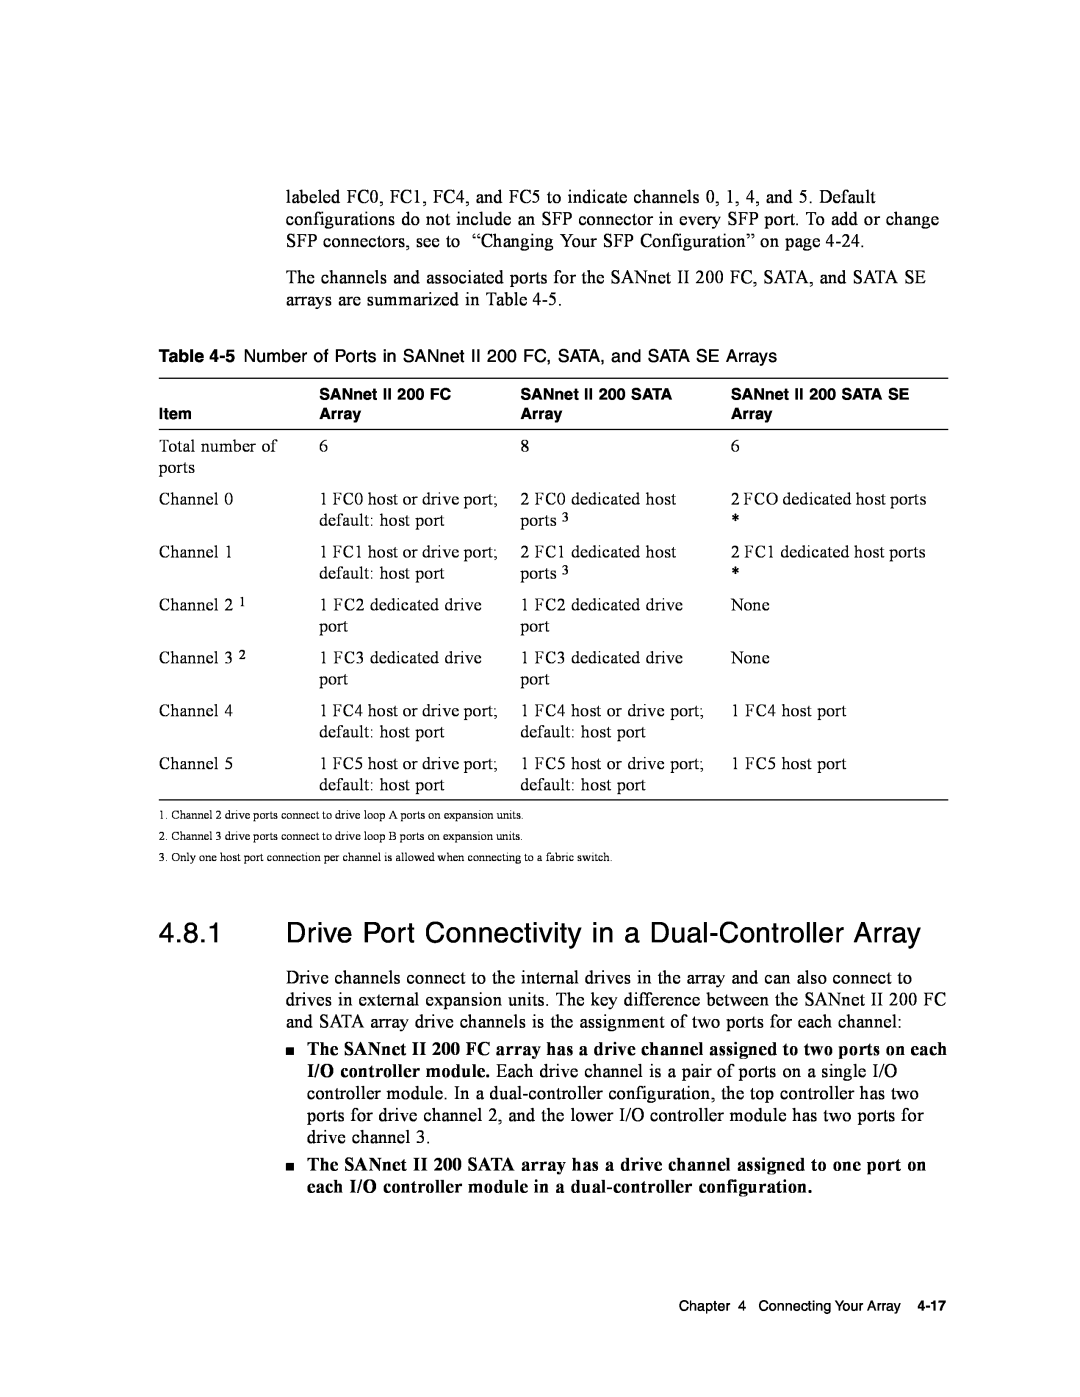 Dot Hill Systems II 200 FC service manual Drive Port Connectivity in a Dual-Controller Array 